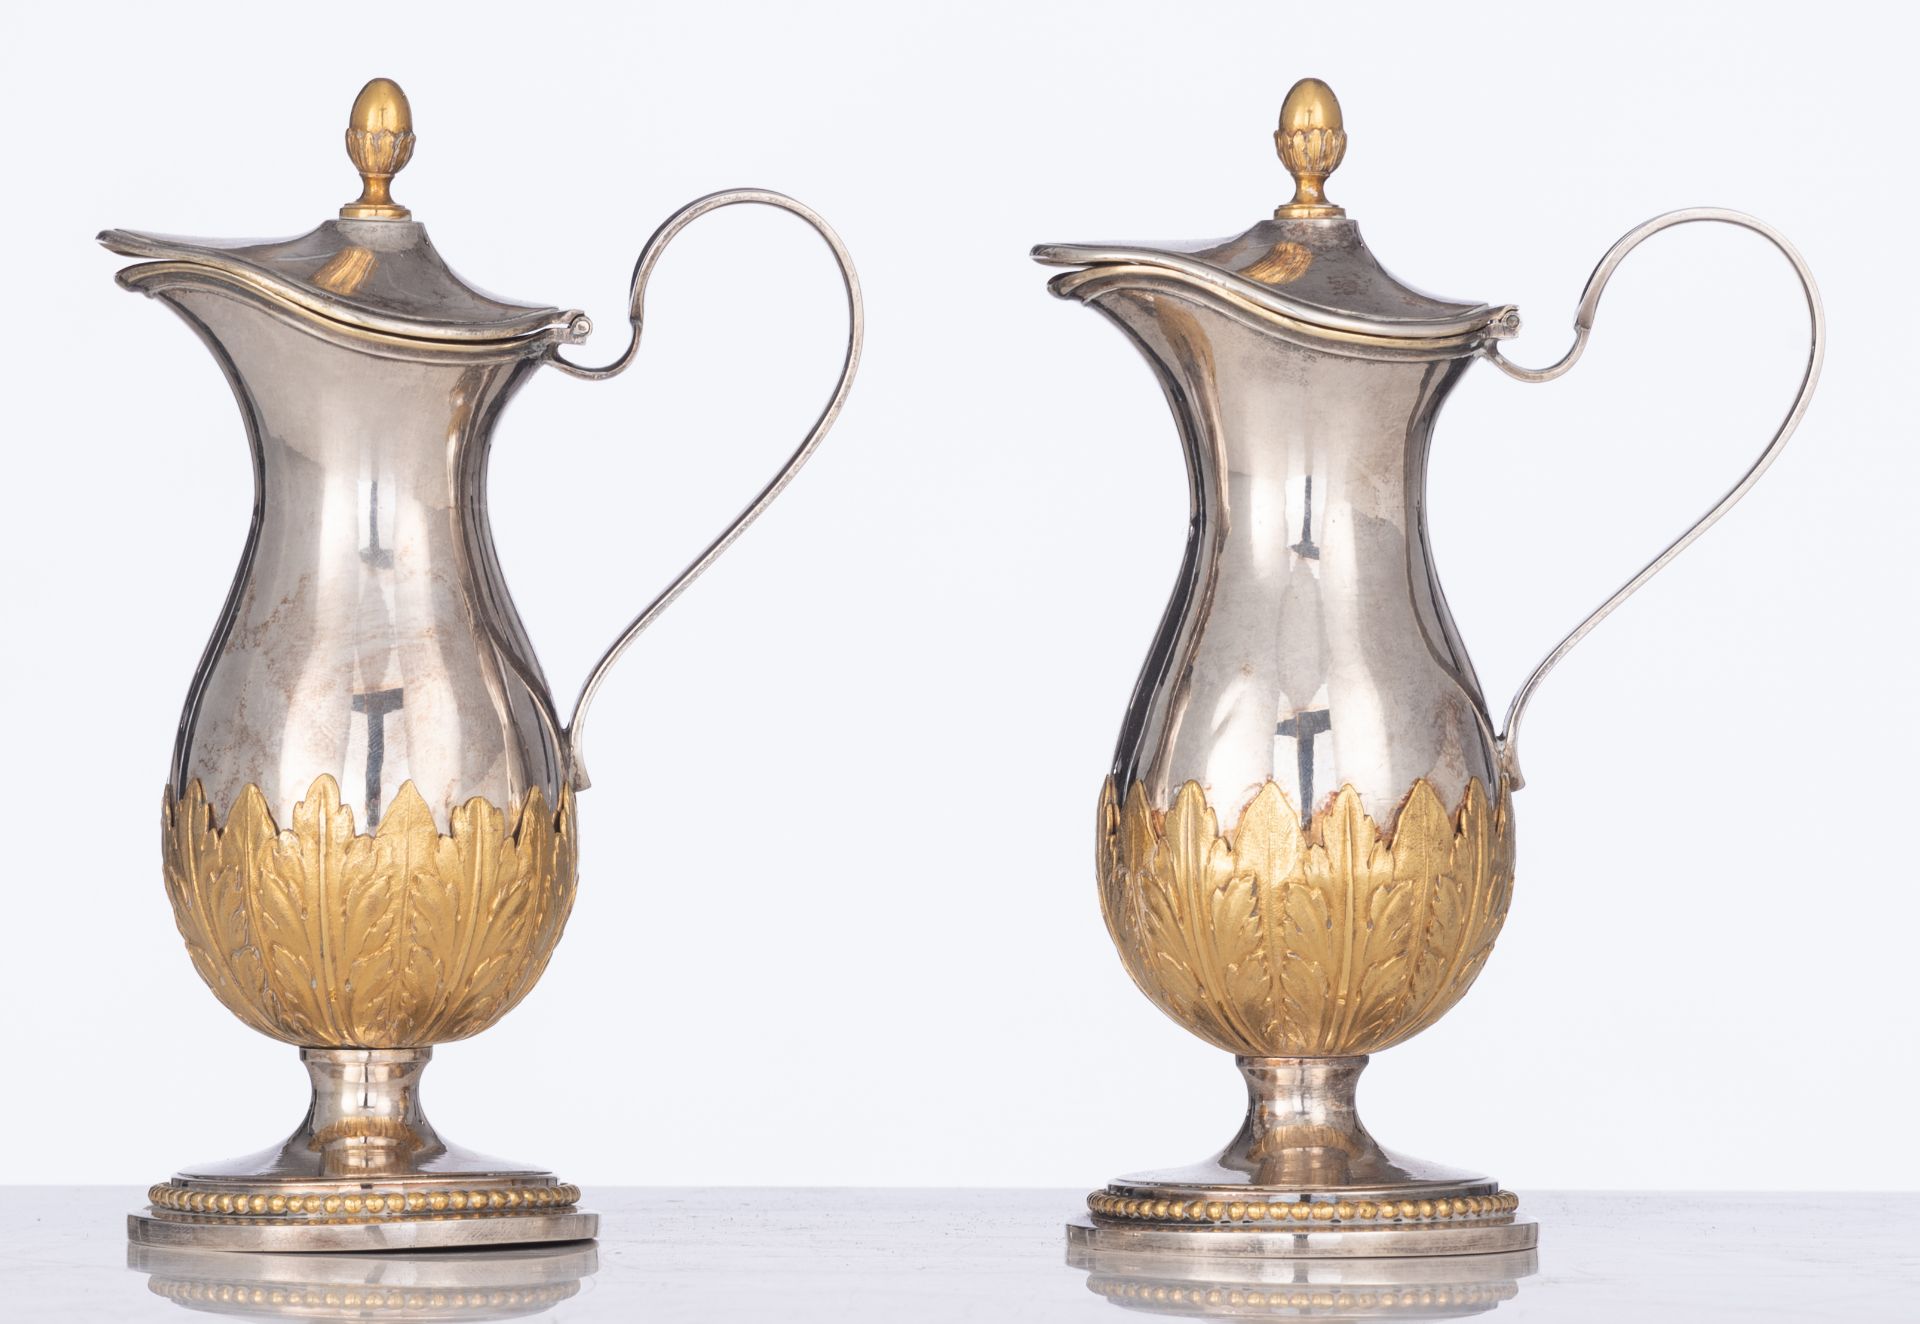 A pair of 18thC silver and vermeil jugs, no visible hallmarks, H 15,5 cm, weight: ca. 541 g - Image 2 of 12